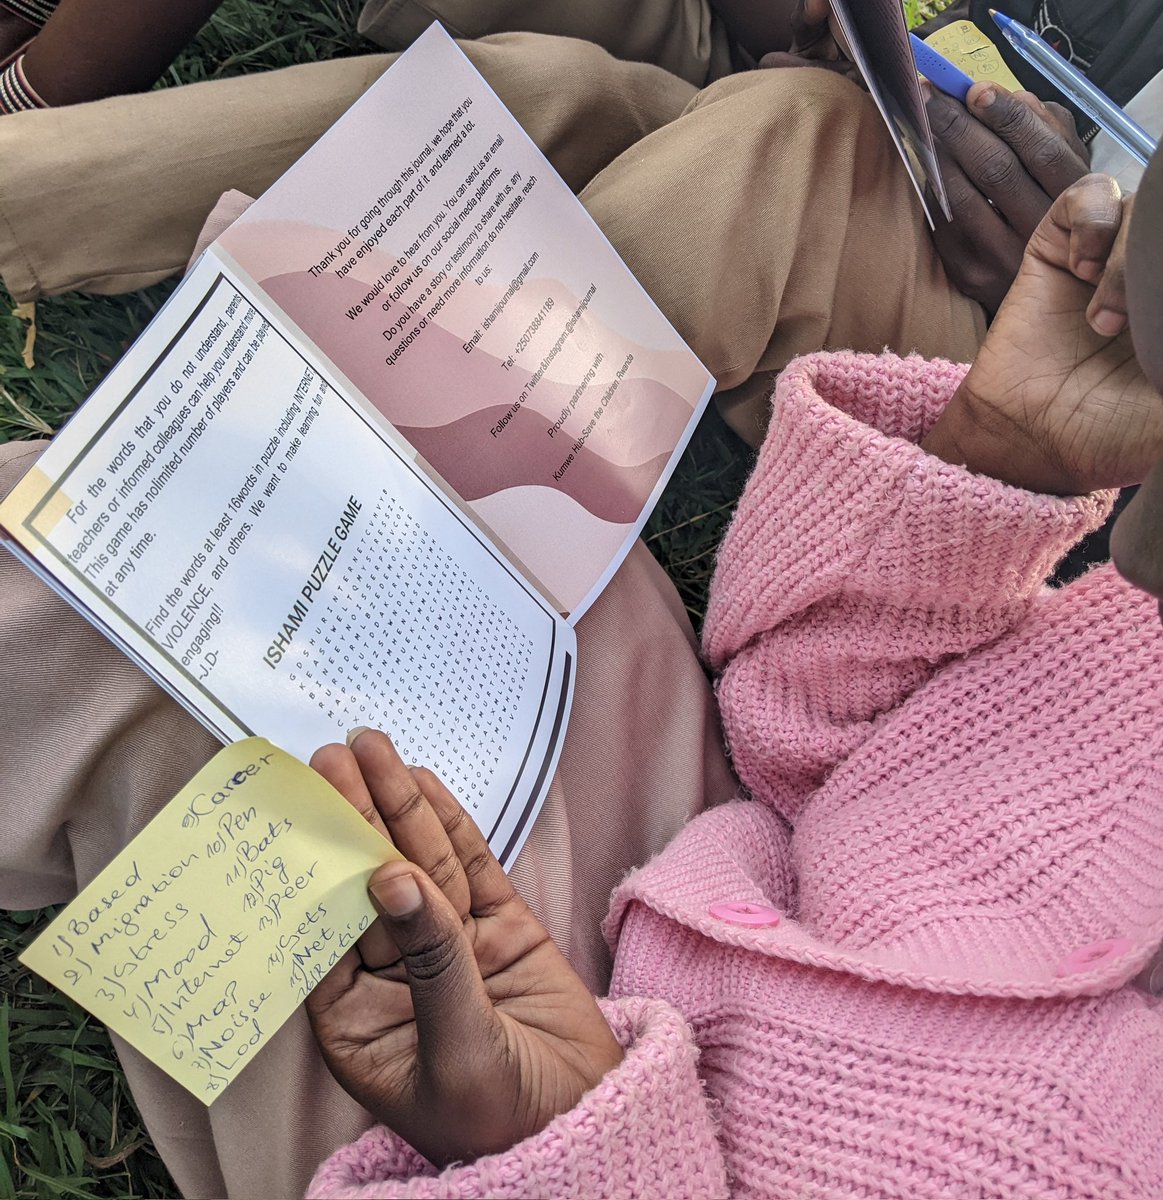 Reading has to be made a routine exercise at home for children to learn. #Ishami🌿 facilitates this practice with engaging hand-sized  Journals printed for children and Parents at home& students at school.
They are enriched with stories&games. #FoundationalLearning @TunozeGusoma